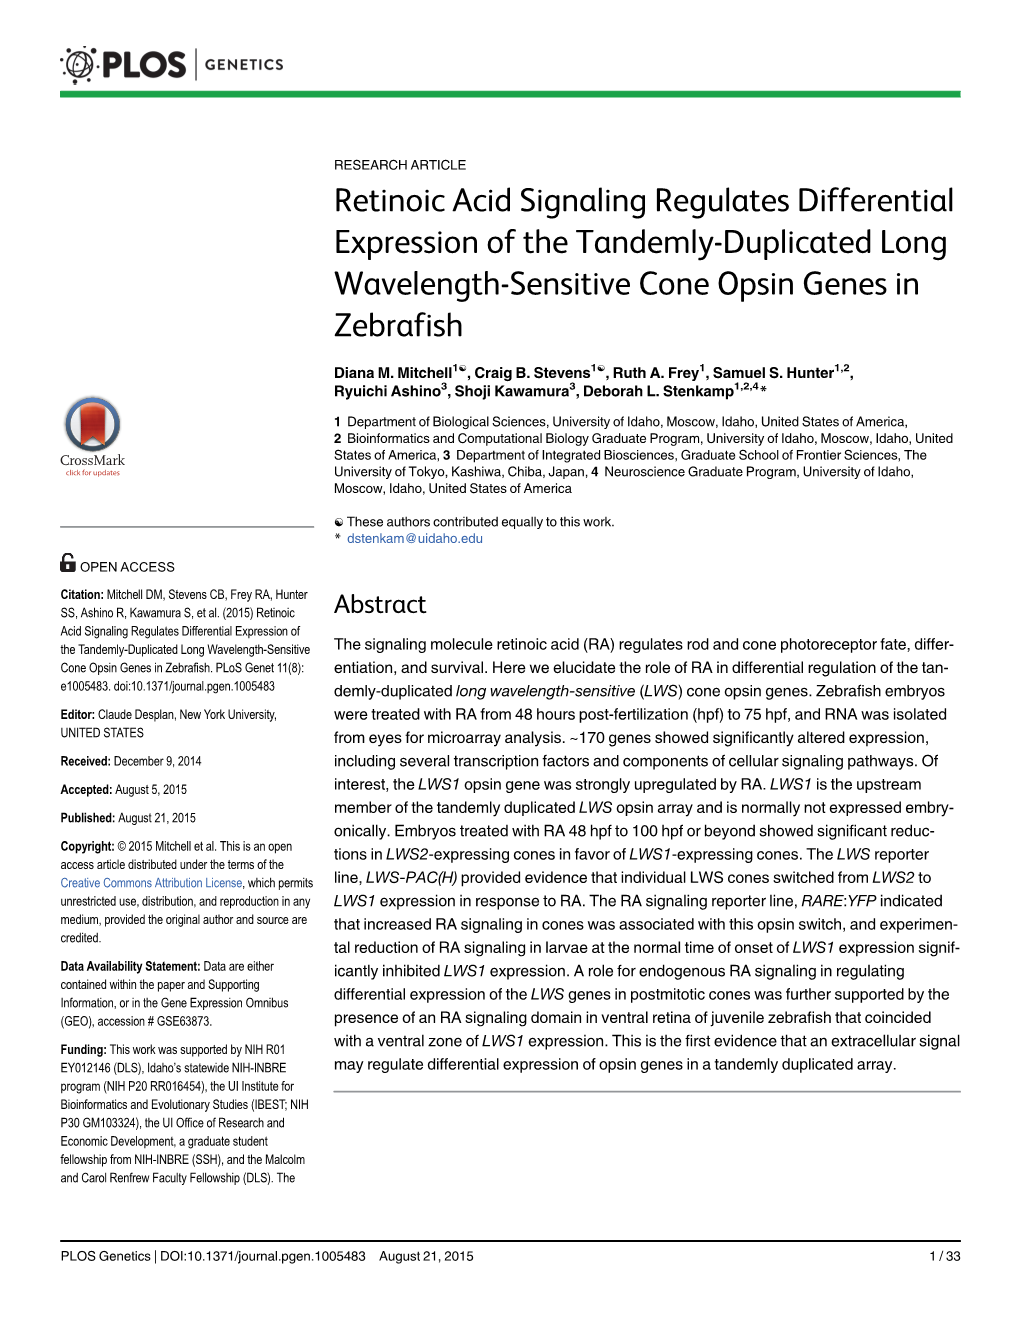 Retinoic Acid Signaling Regulates Differential Expression of the Tandemly-Duplicated Long Wavelength-Sensitive Cone Opsin Genes in Zebrafish